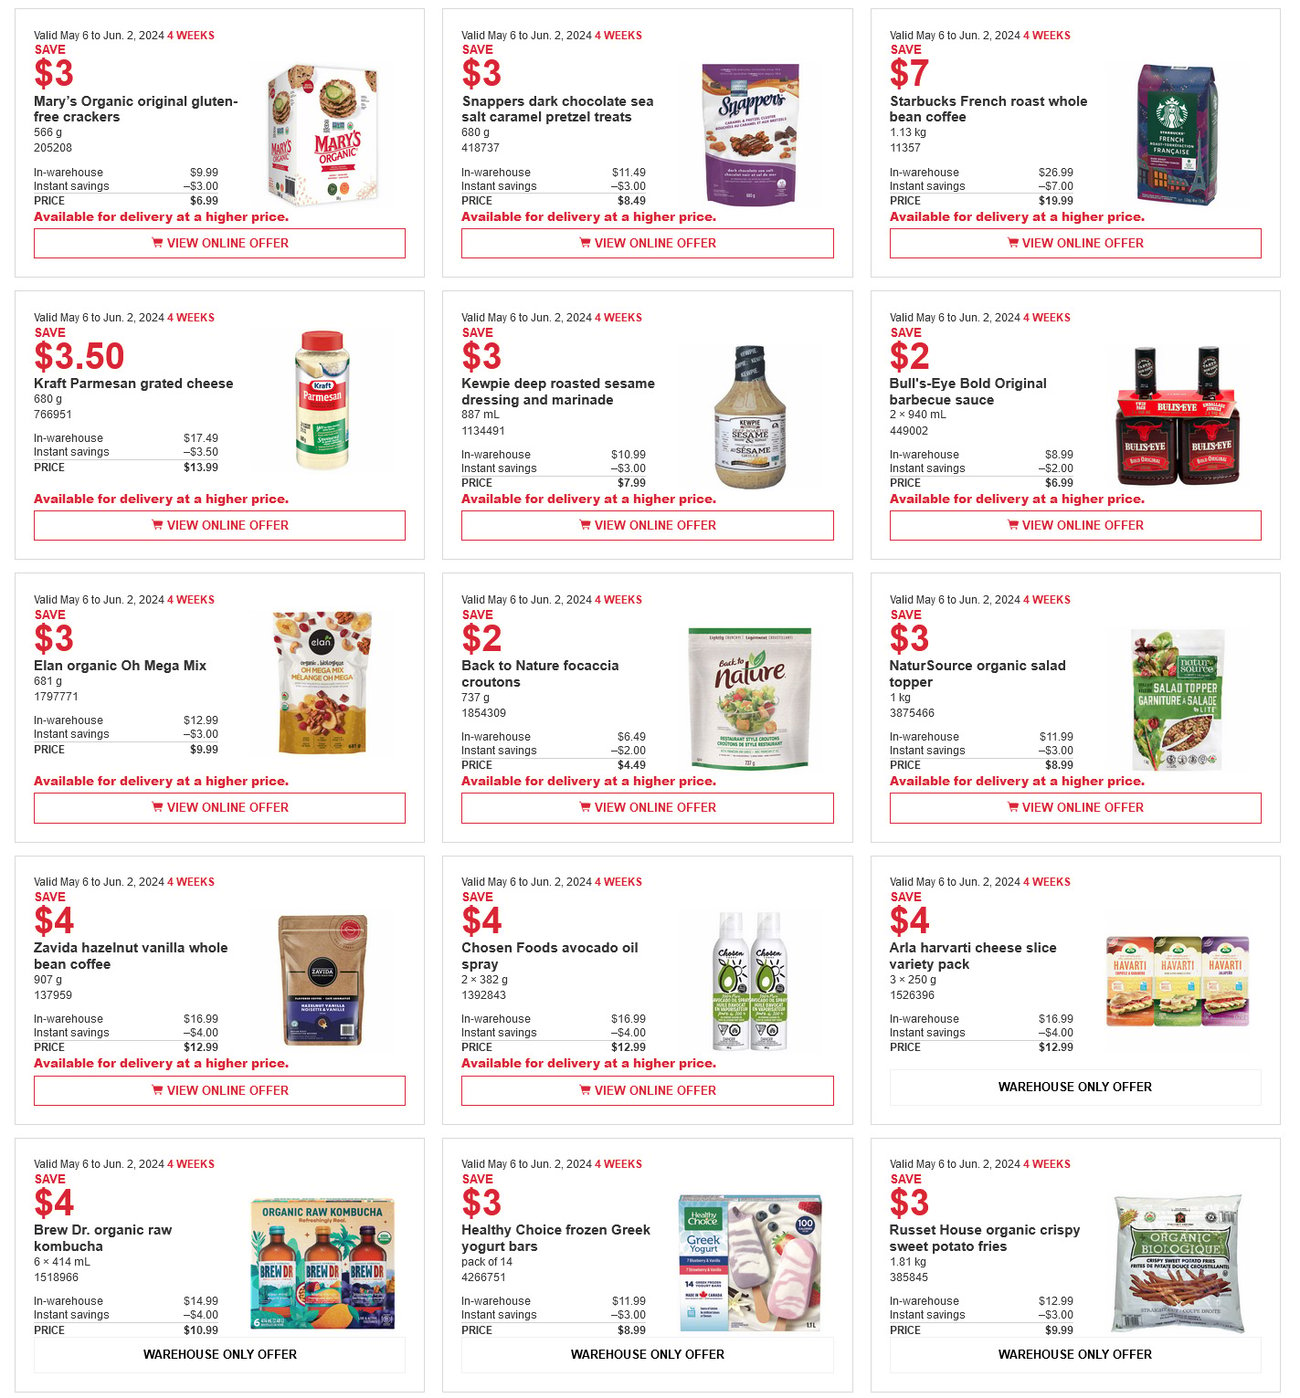 Costco Flyer - Savings & Coupons at your Local Warehouse and Online - Page 4